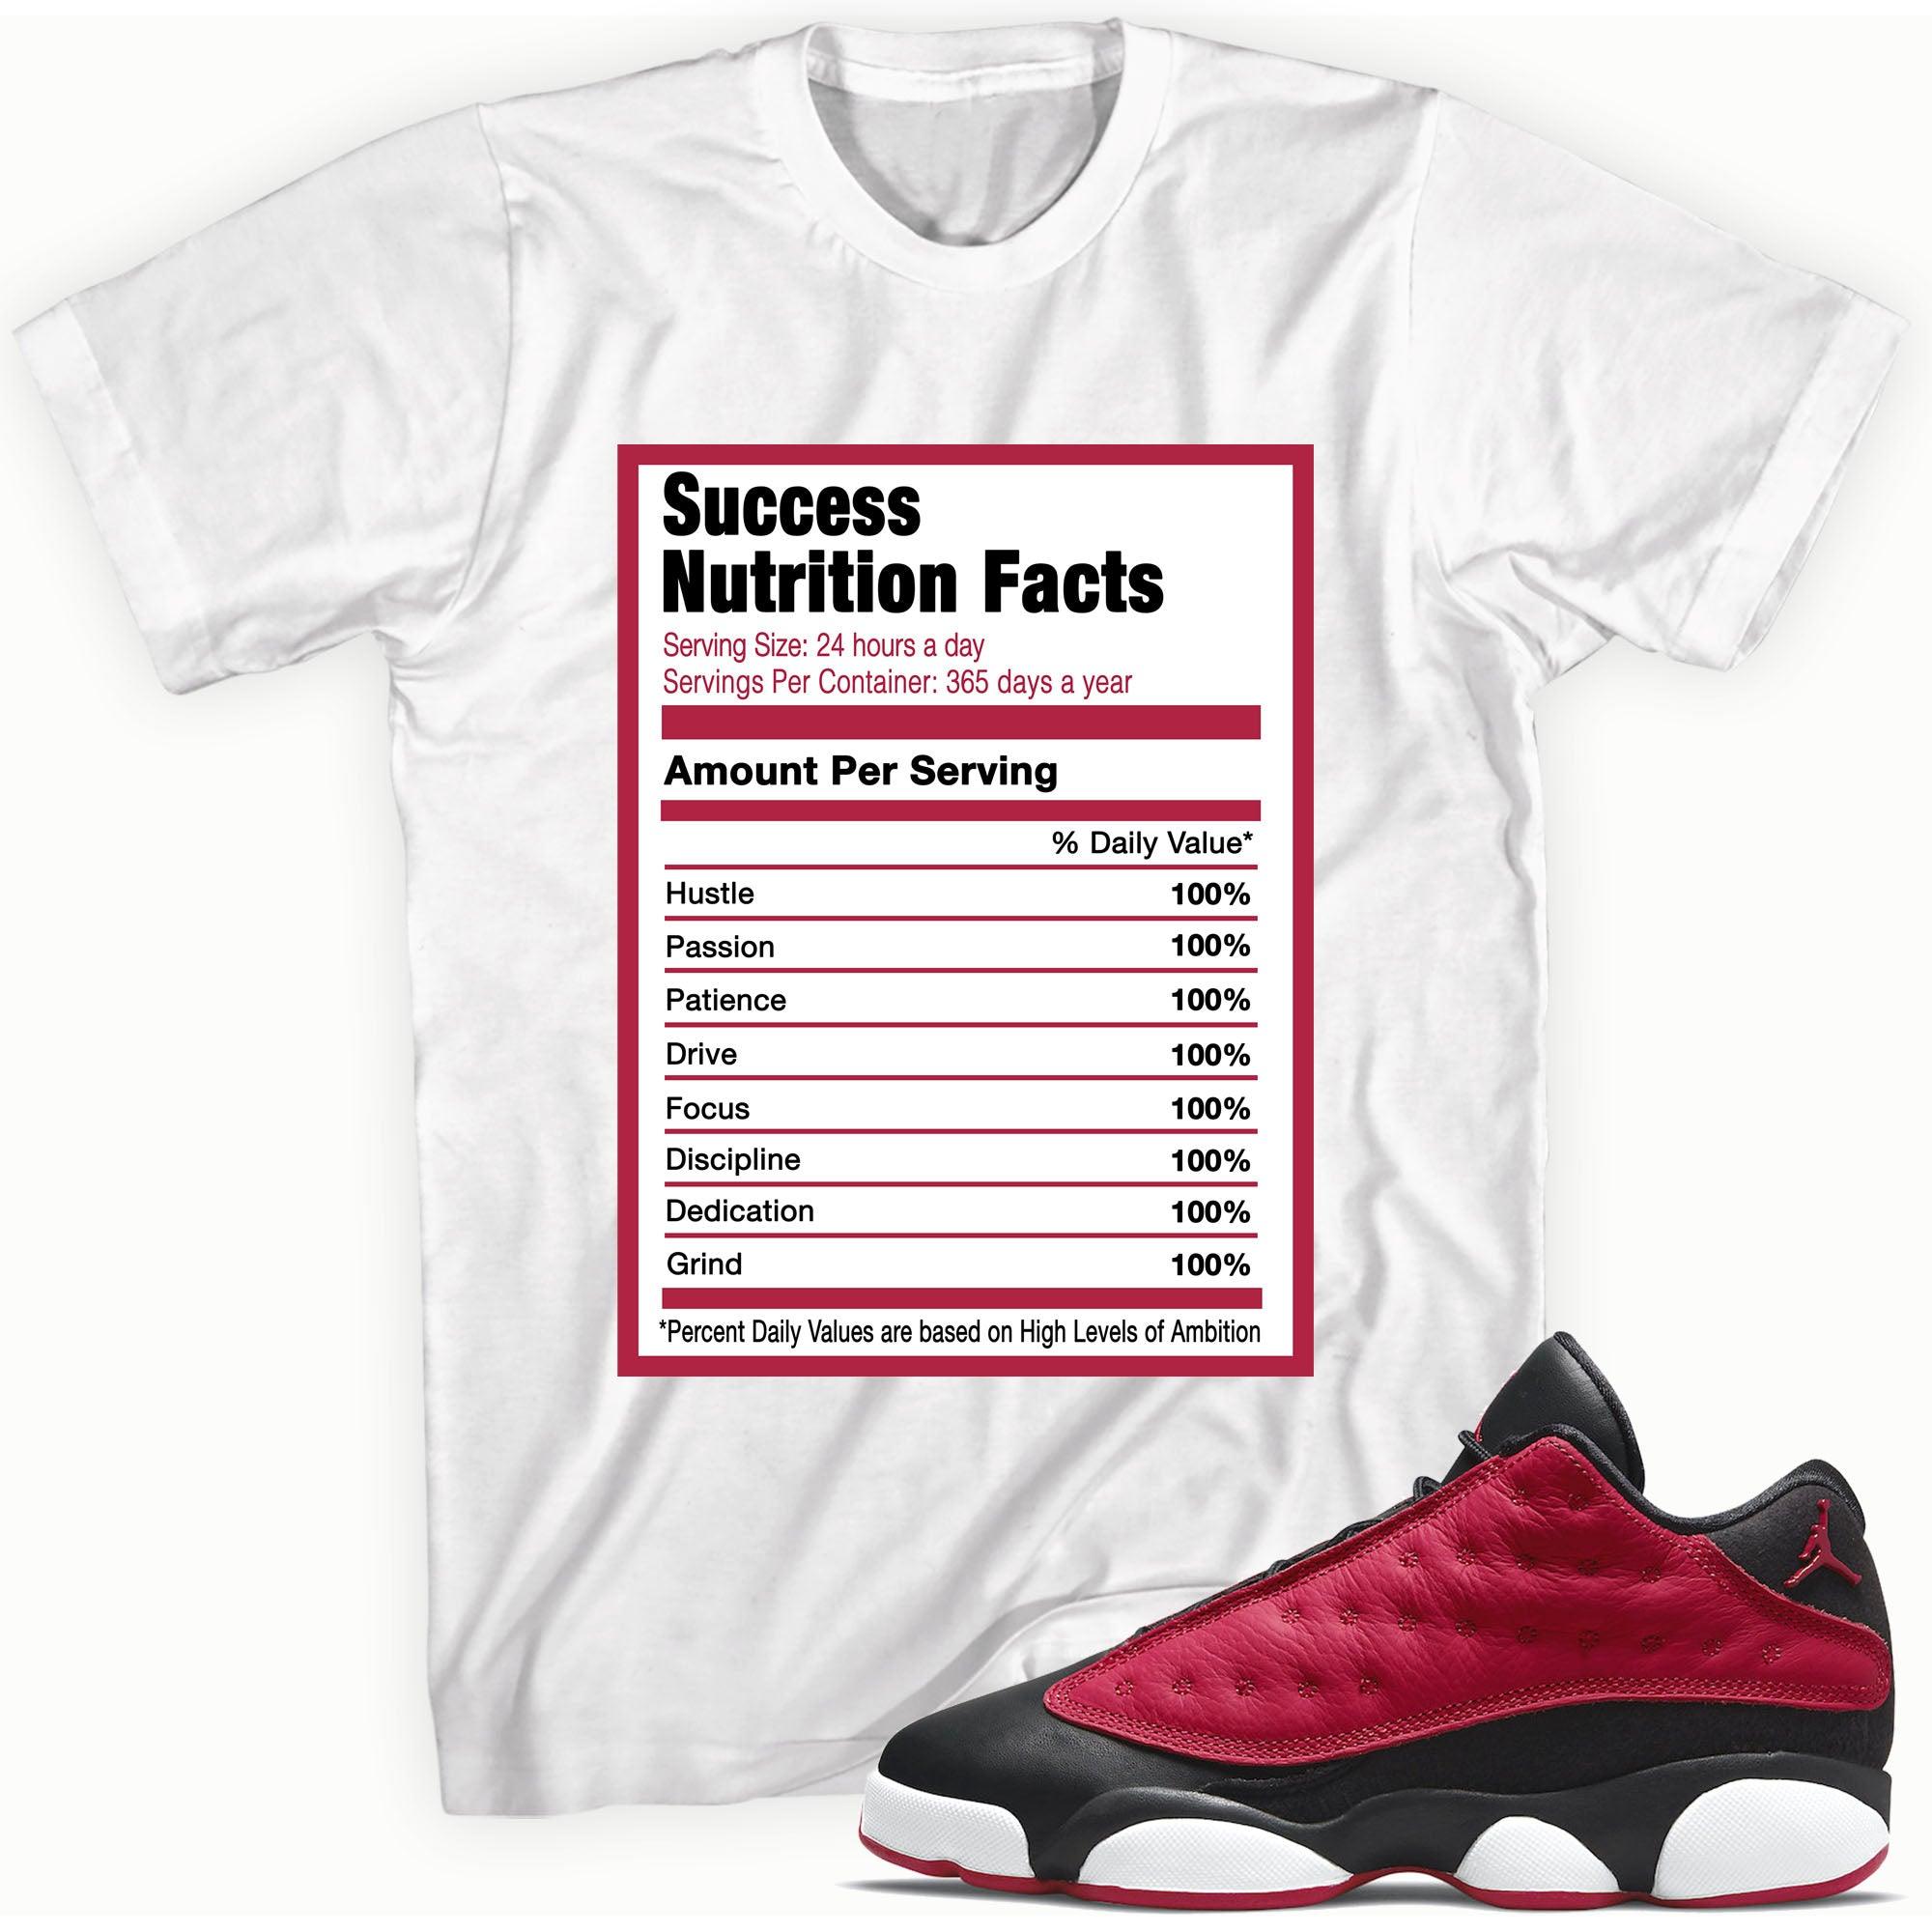 Success Nutrition Fact Sneaker Tee AJ 13 Low GS Very Berry photo